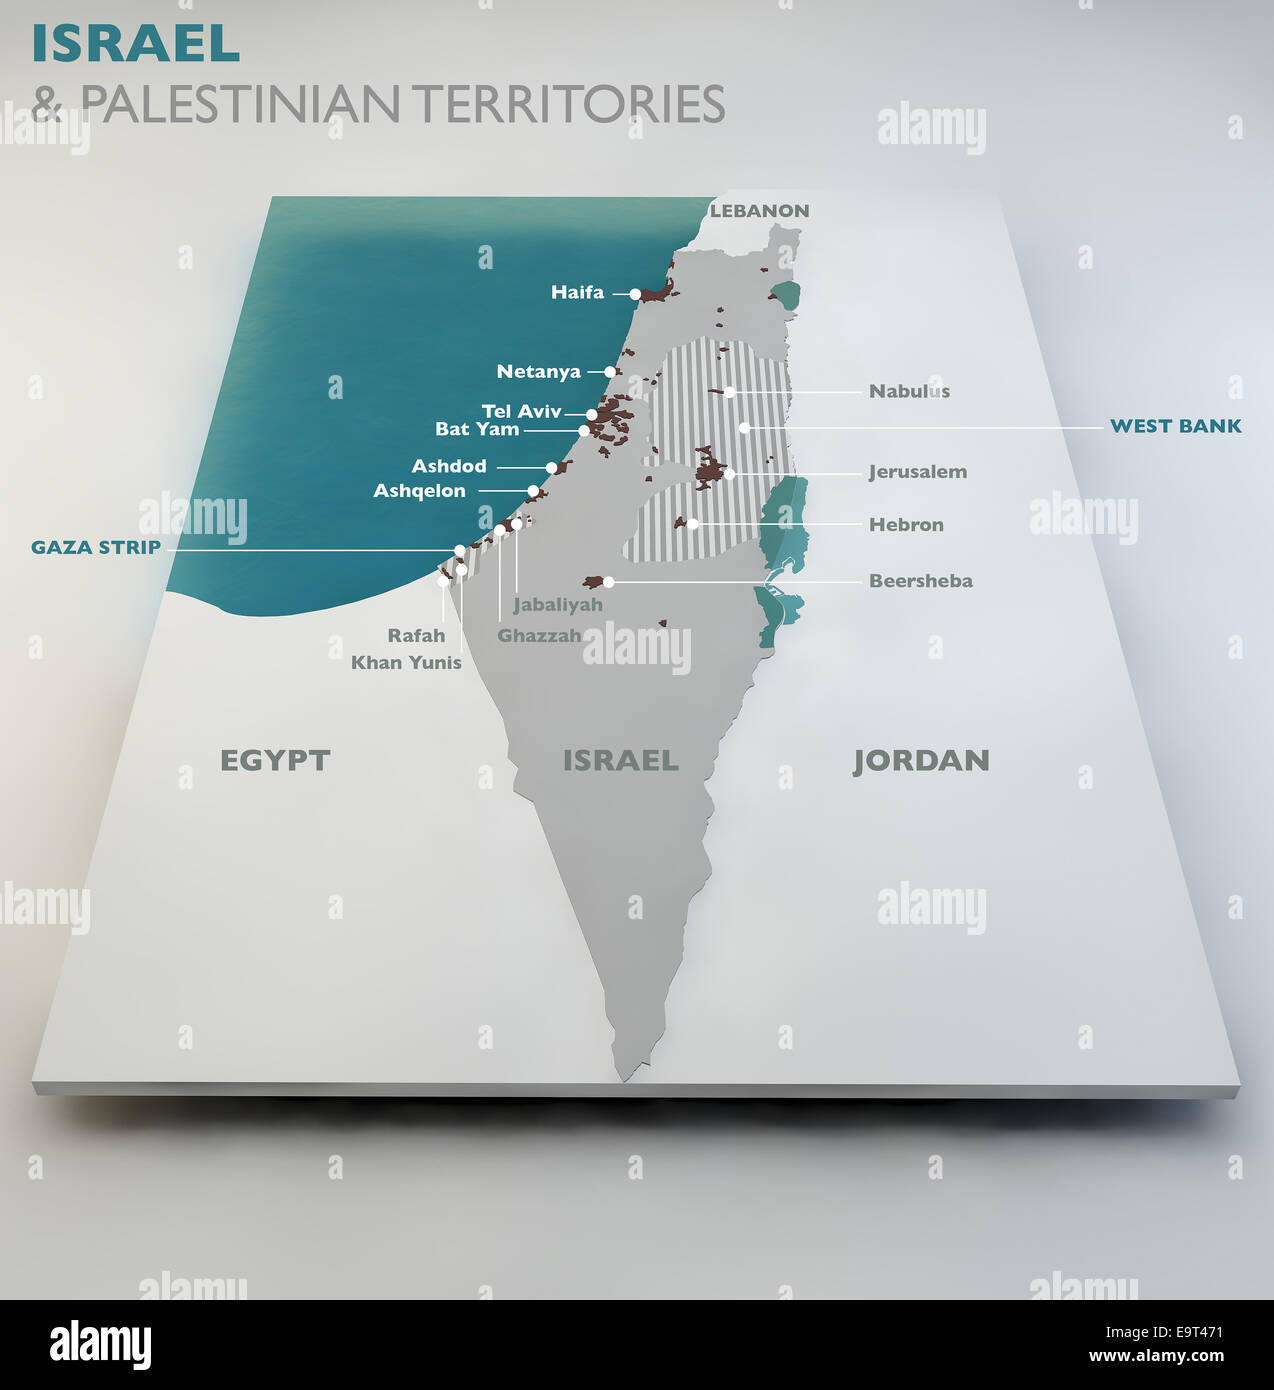 Israel and Palestinian territories Stock Photo